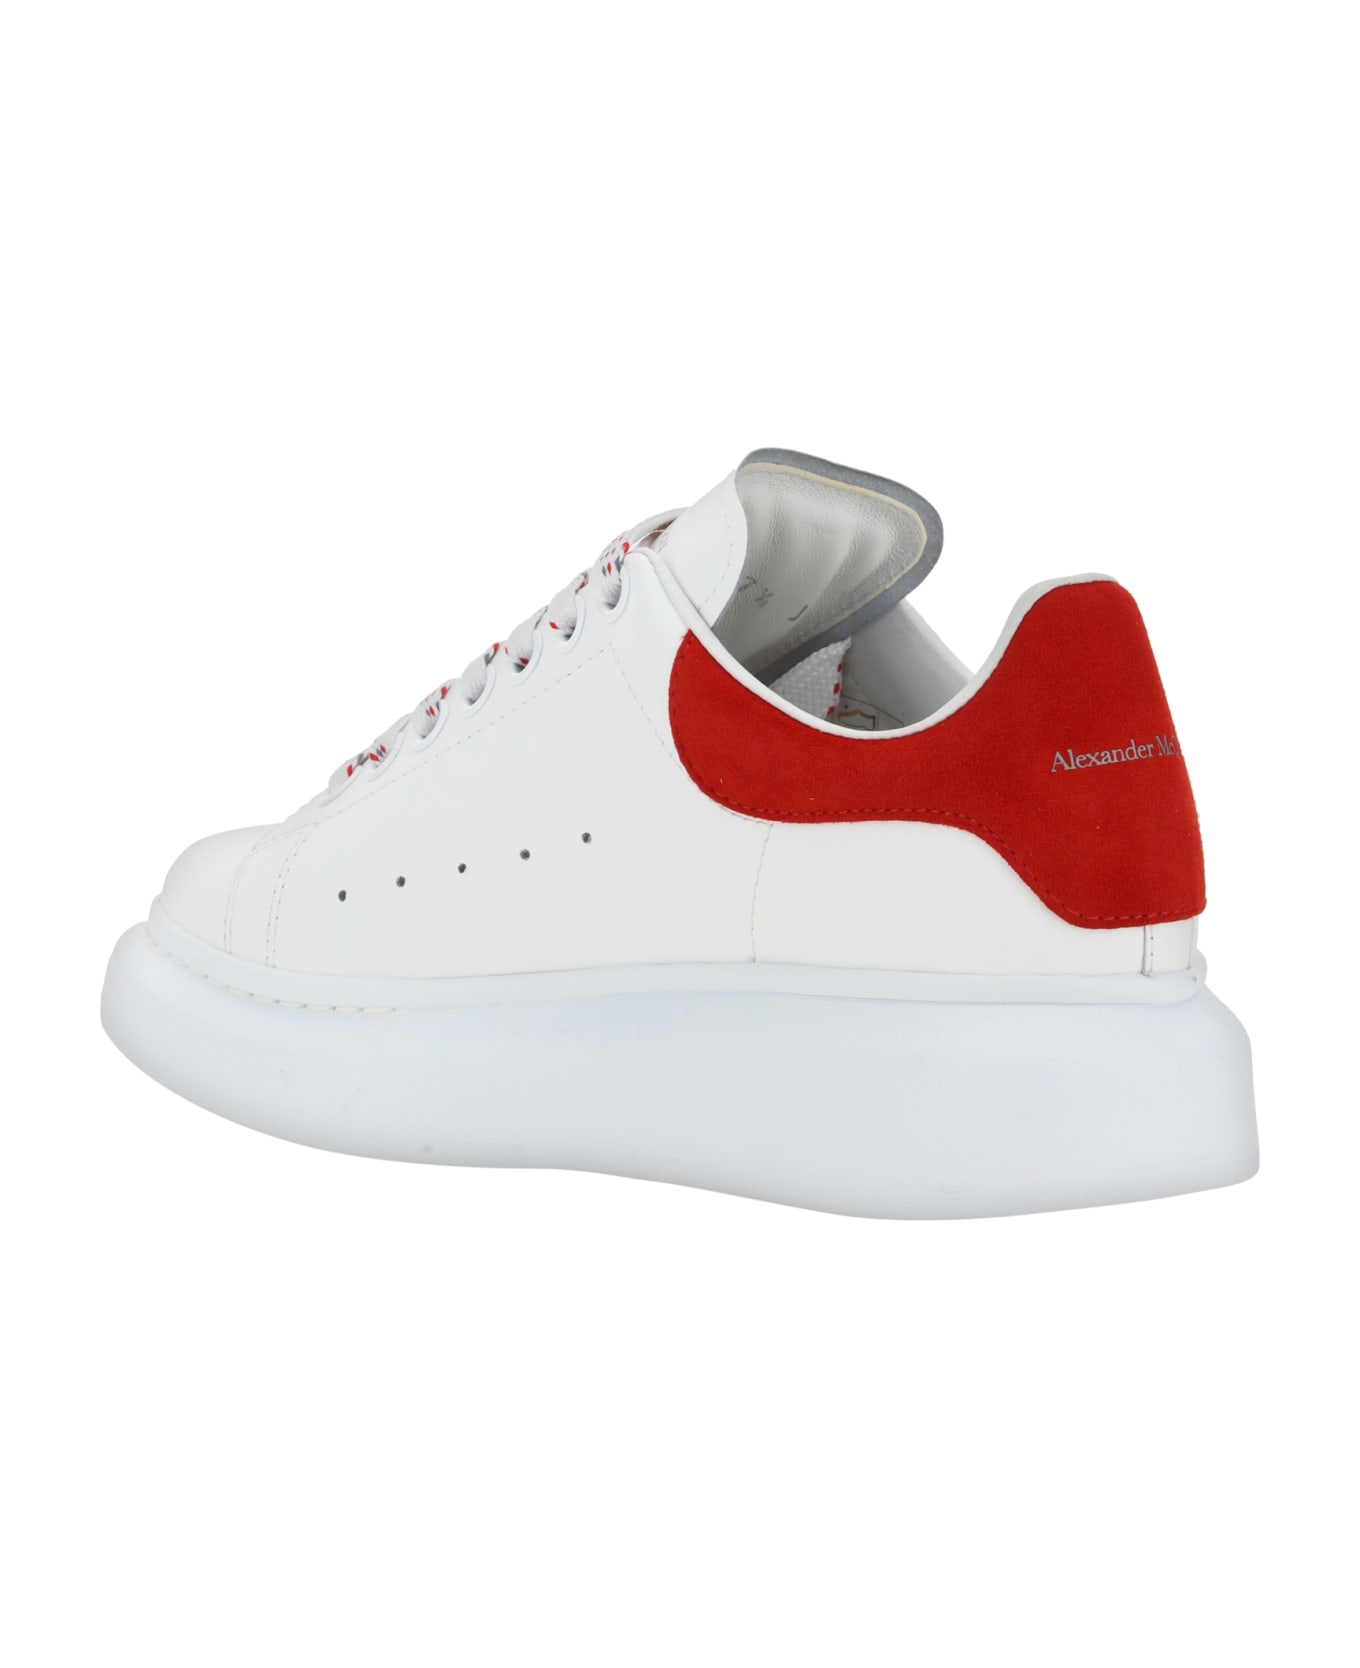 Alexander McQueen Oversized Sneakers In Leather With Contrasting Heel Tab - White Lust Red